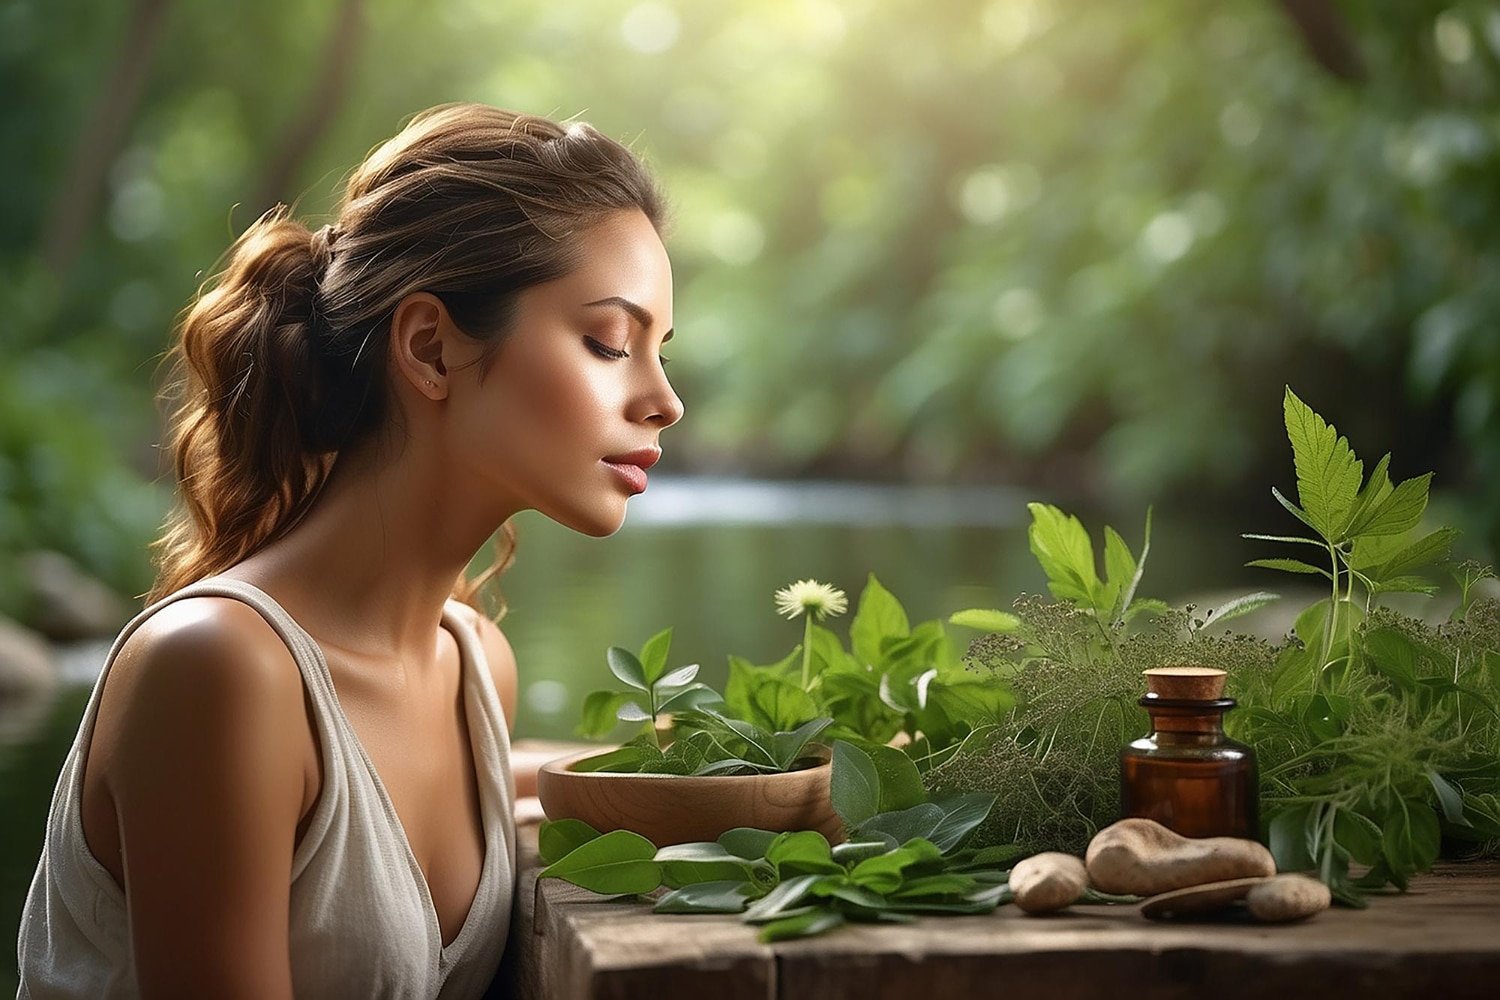 Revitalize Your Wellbeing With NEOM Organics’ Natural Remedies